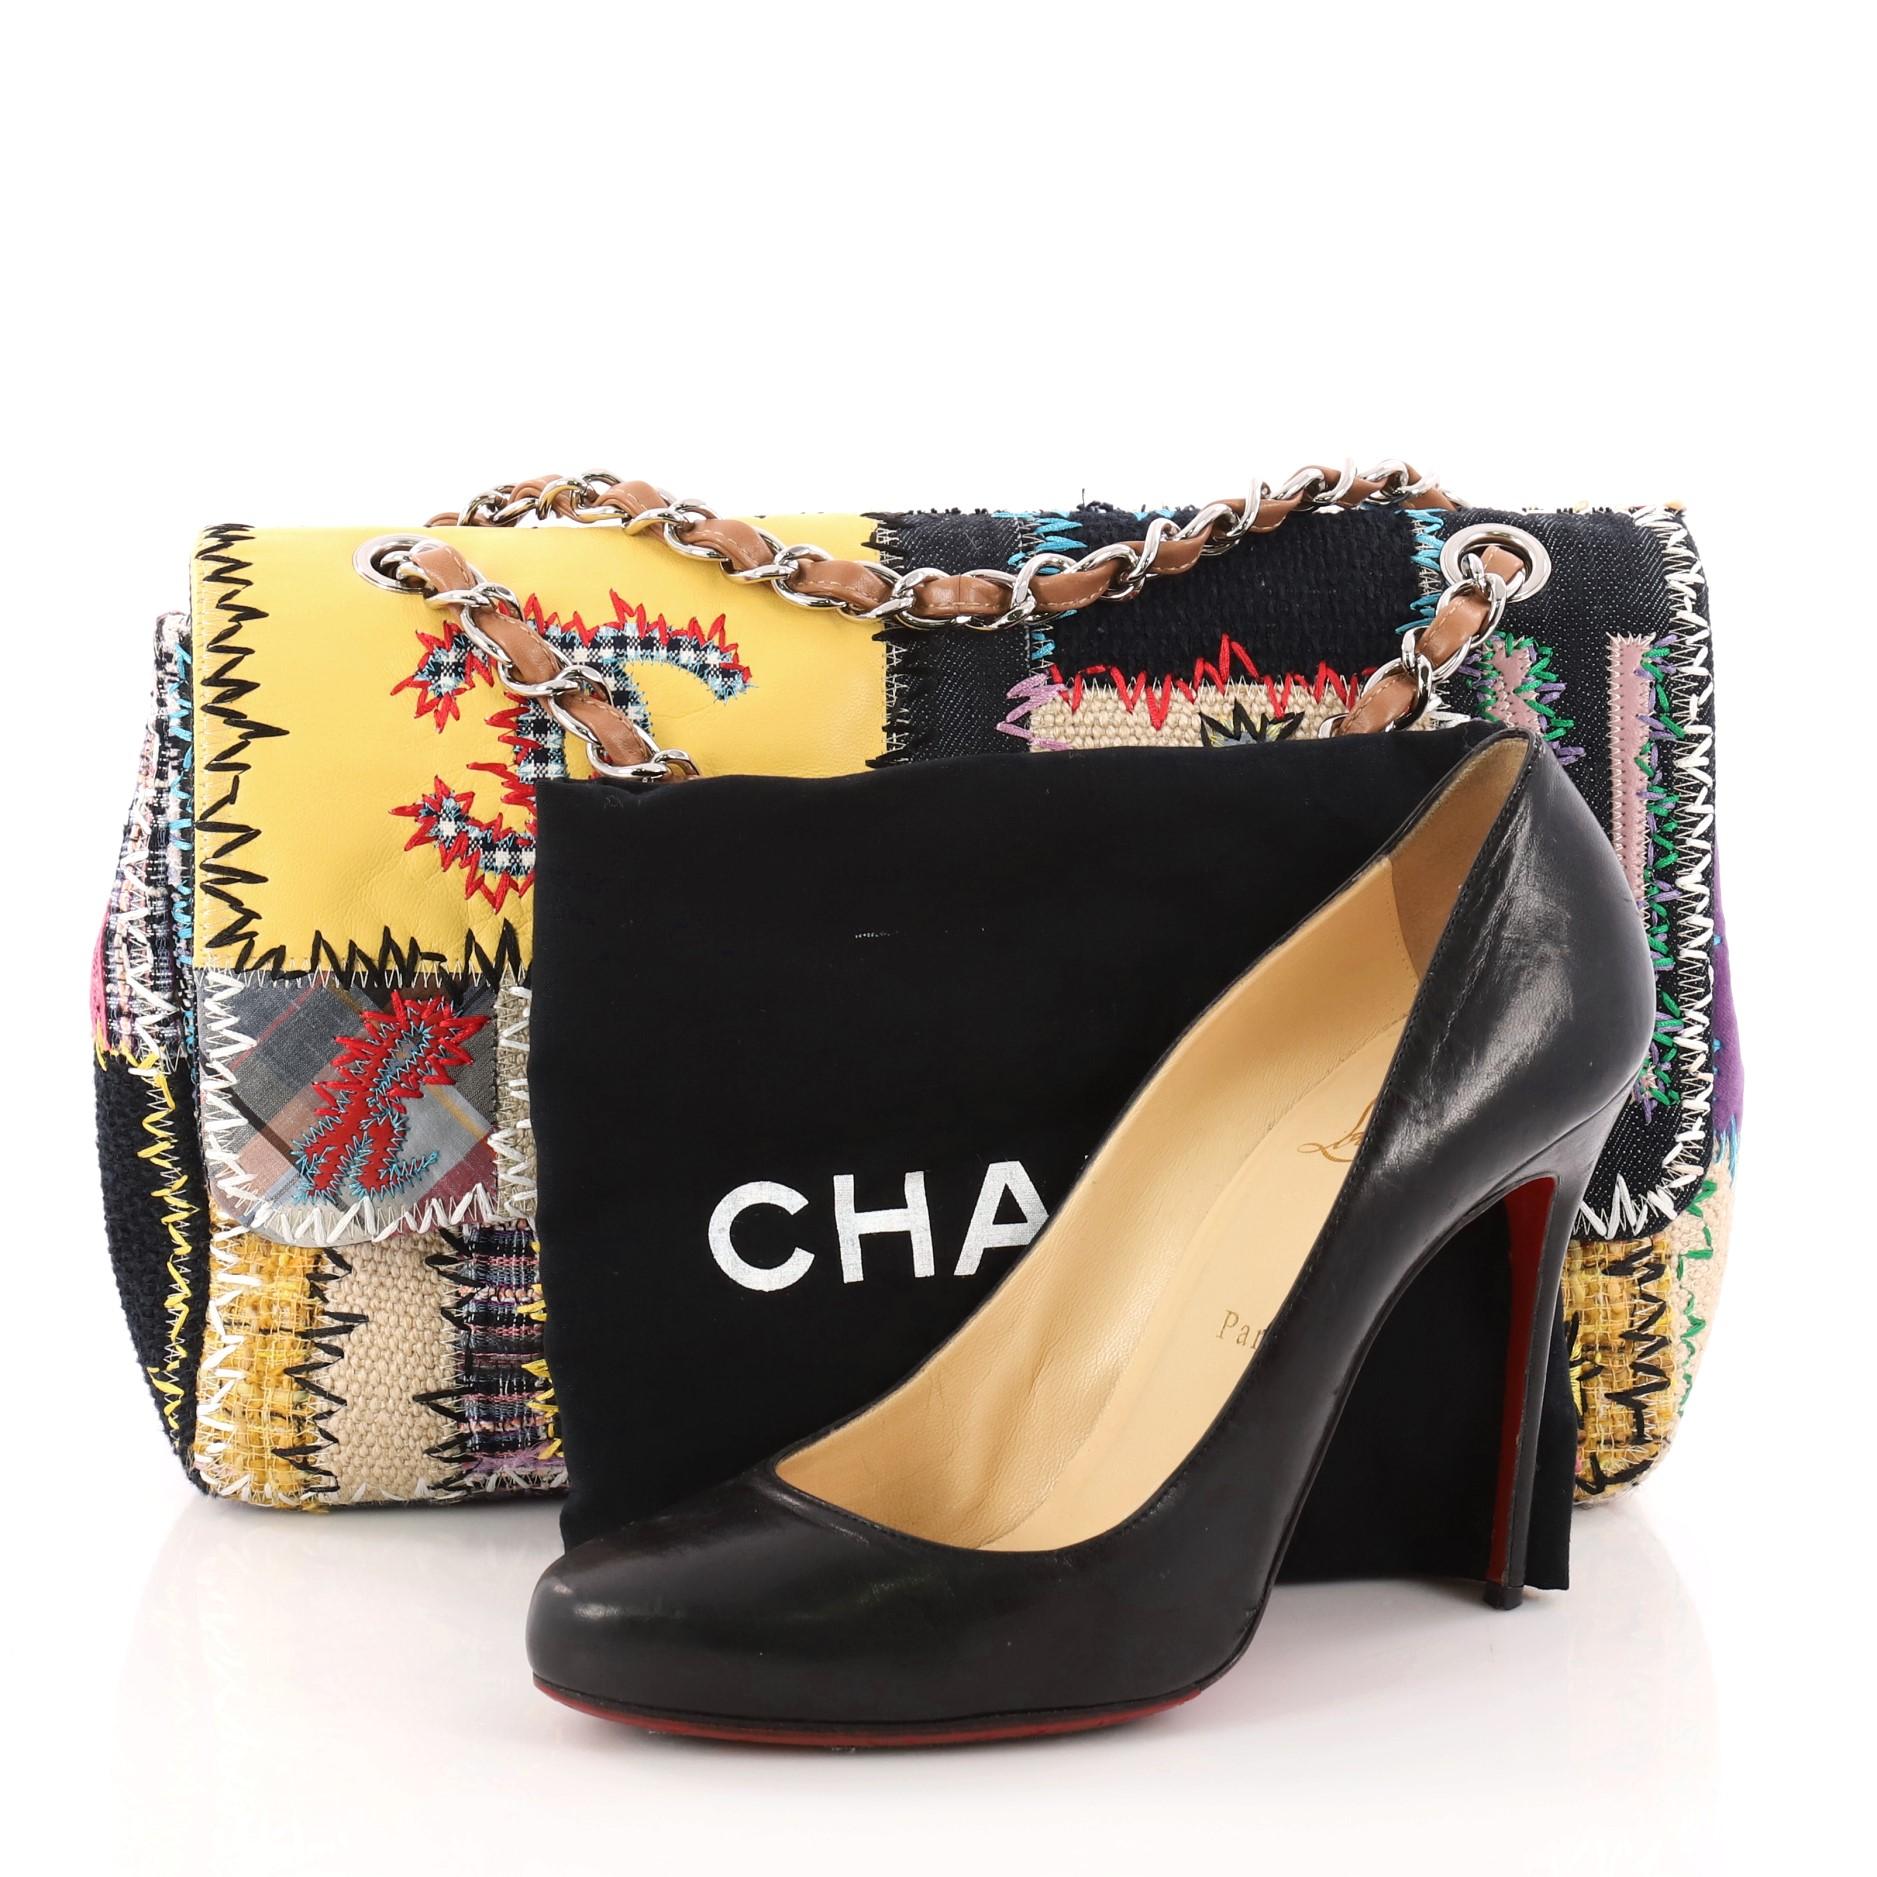 This authentic Chanel Flap Bag Multicolor Patchwork Jumbo is one of the most-sought-after bags beloved by fashionistas. Excellently crafted in a stand-out multicolor patchwork design, this funky take on Chanel's traditional classic flap bag features